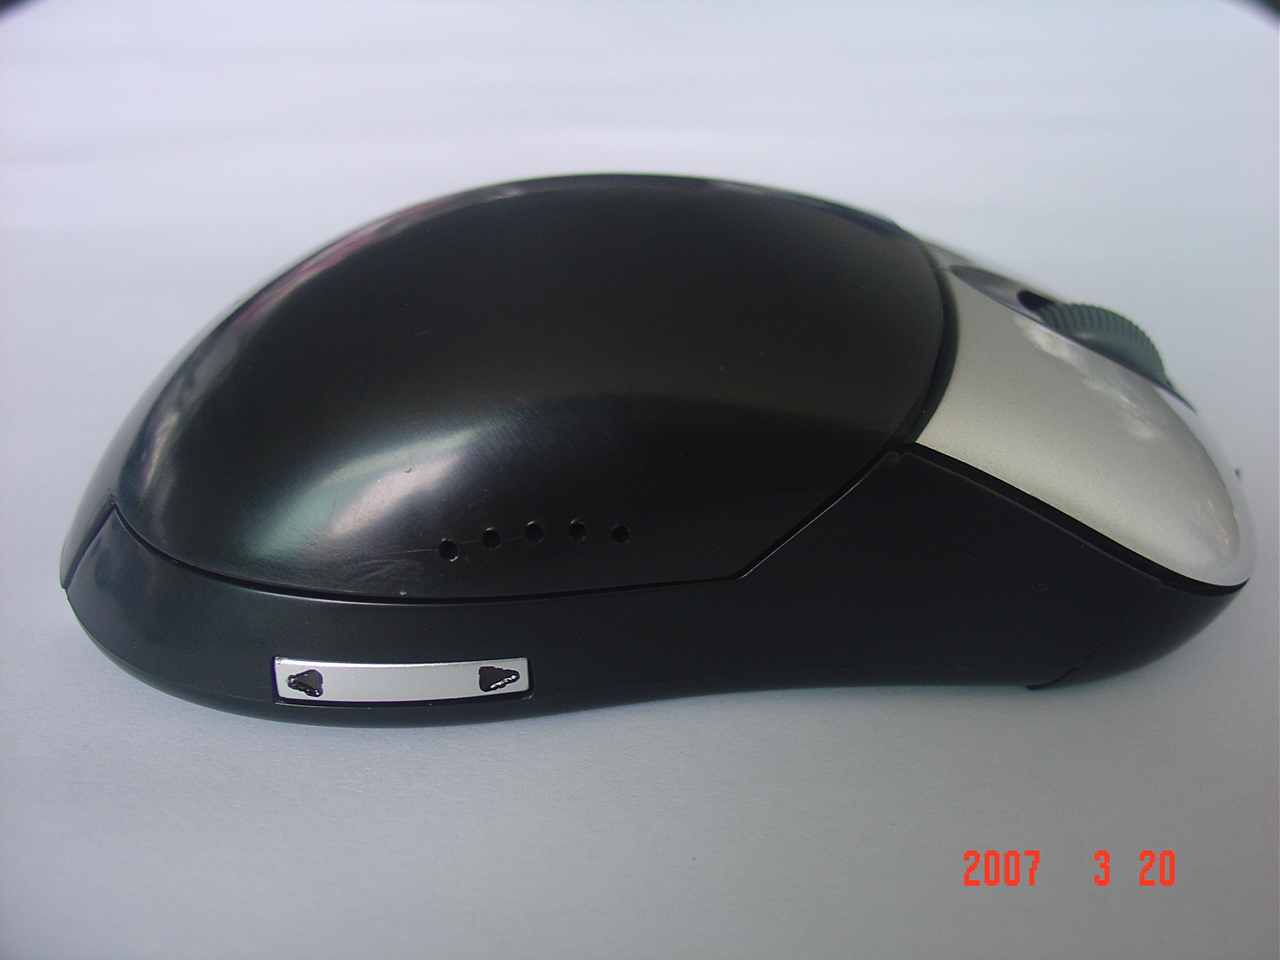 skype mouse